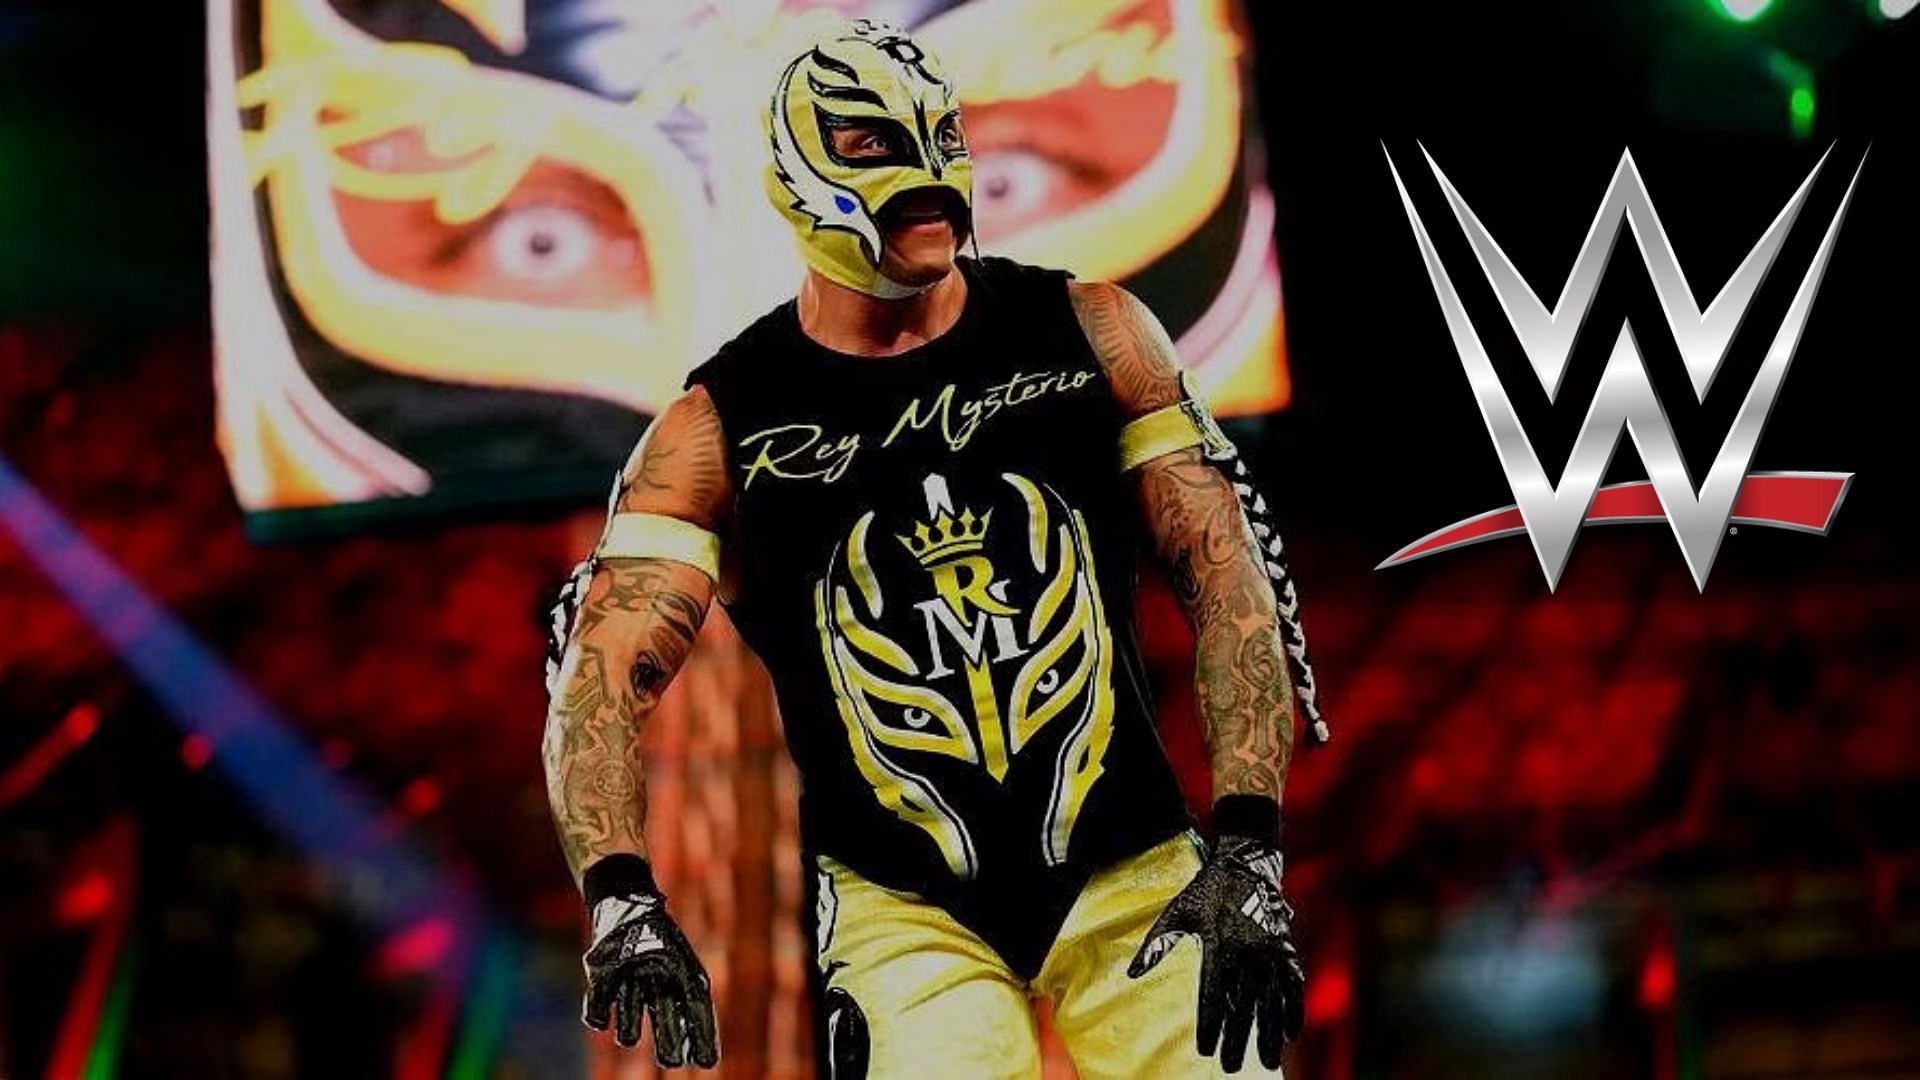 Rey Mysterio has established himself as one of the most recognizable names in pro-wrestling